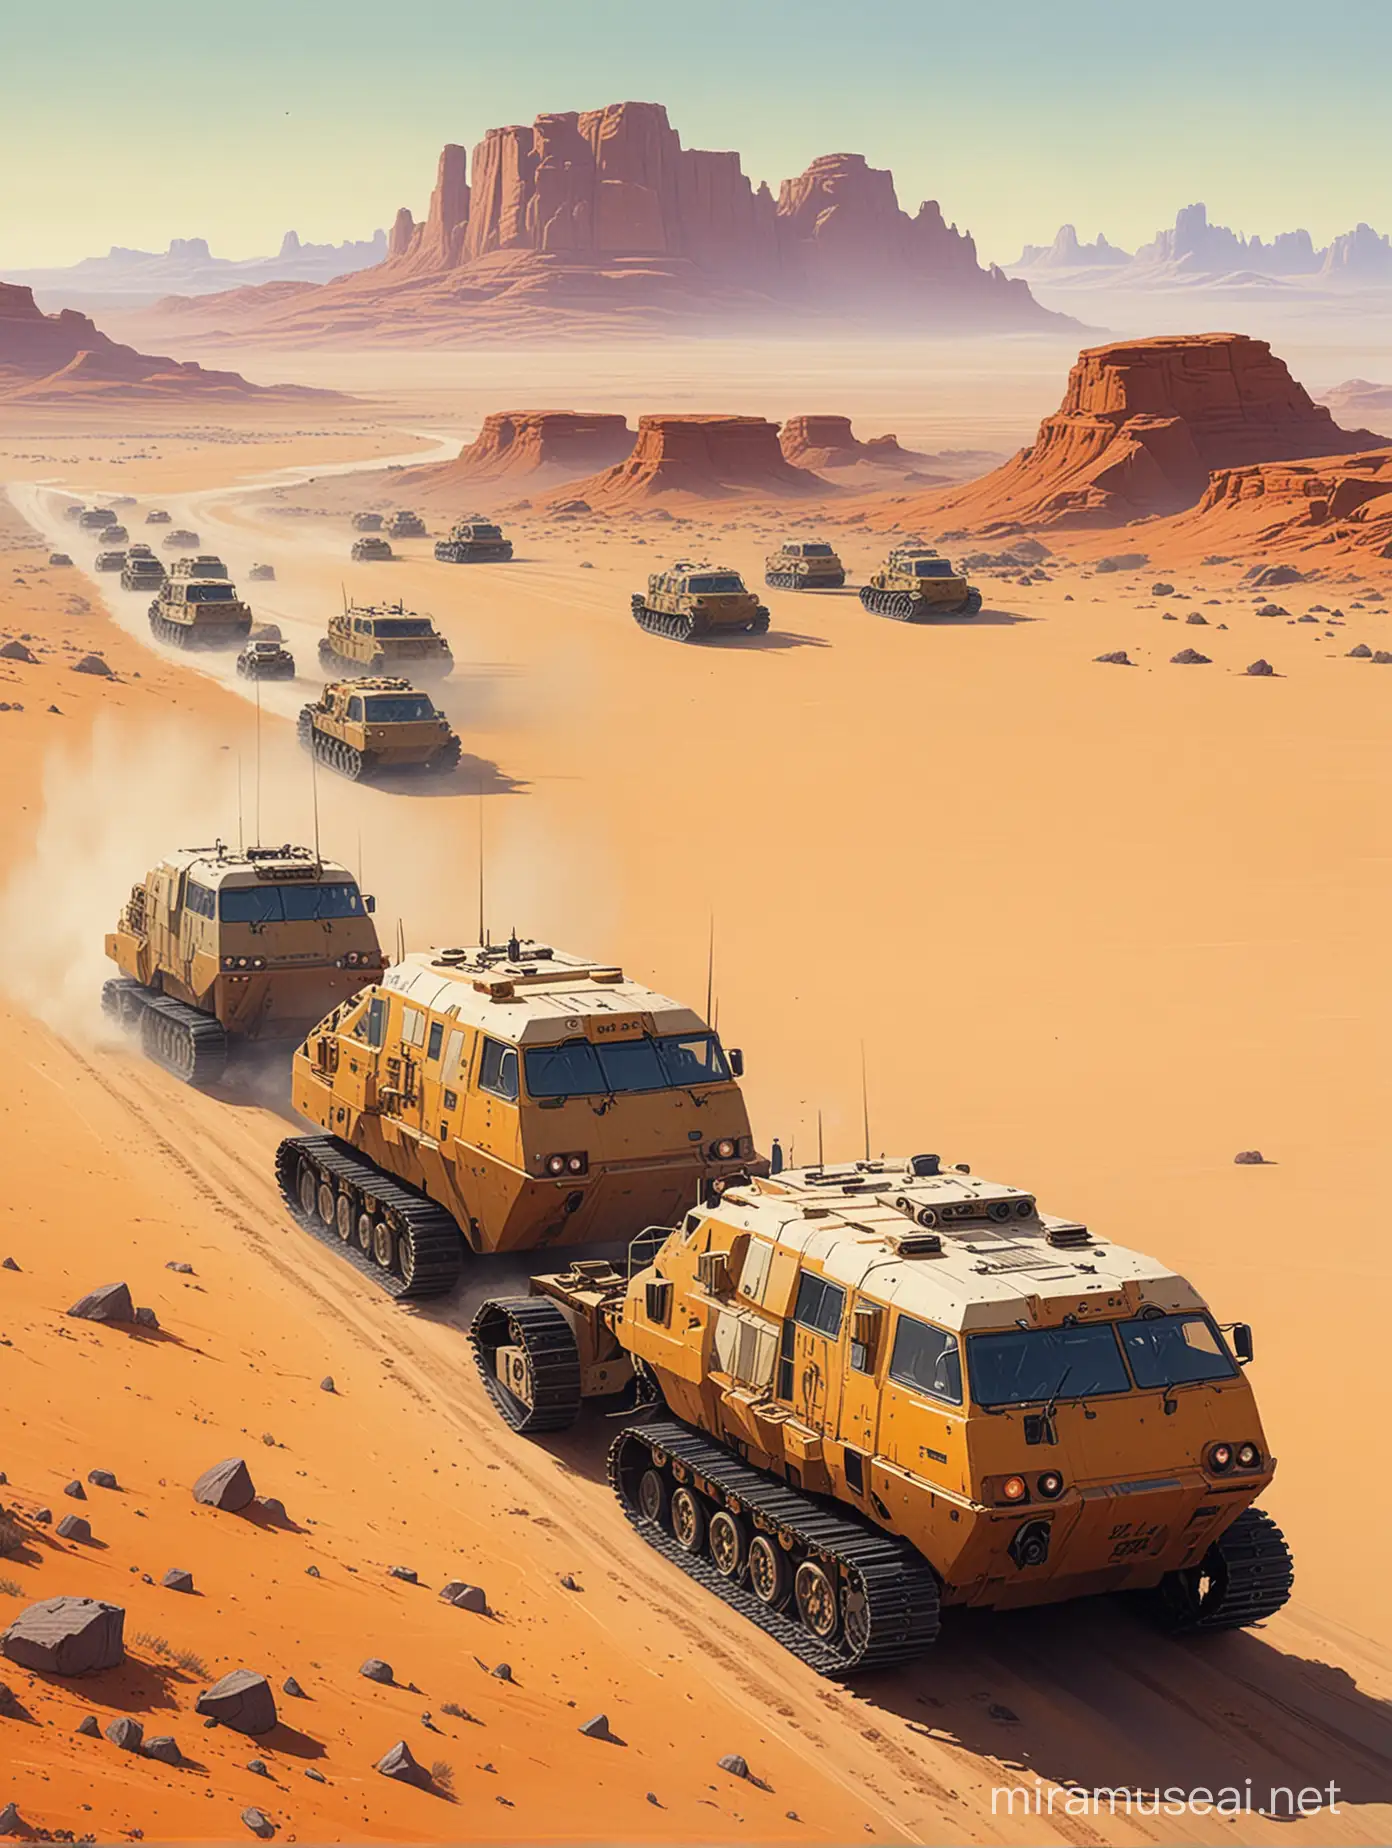 Highly detailed painting based on ((("Travelling Cities" by Chris Foss))), colossal tracked vehicles crawl in a line across a desert, use muted pastel colors only, high quality